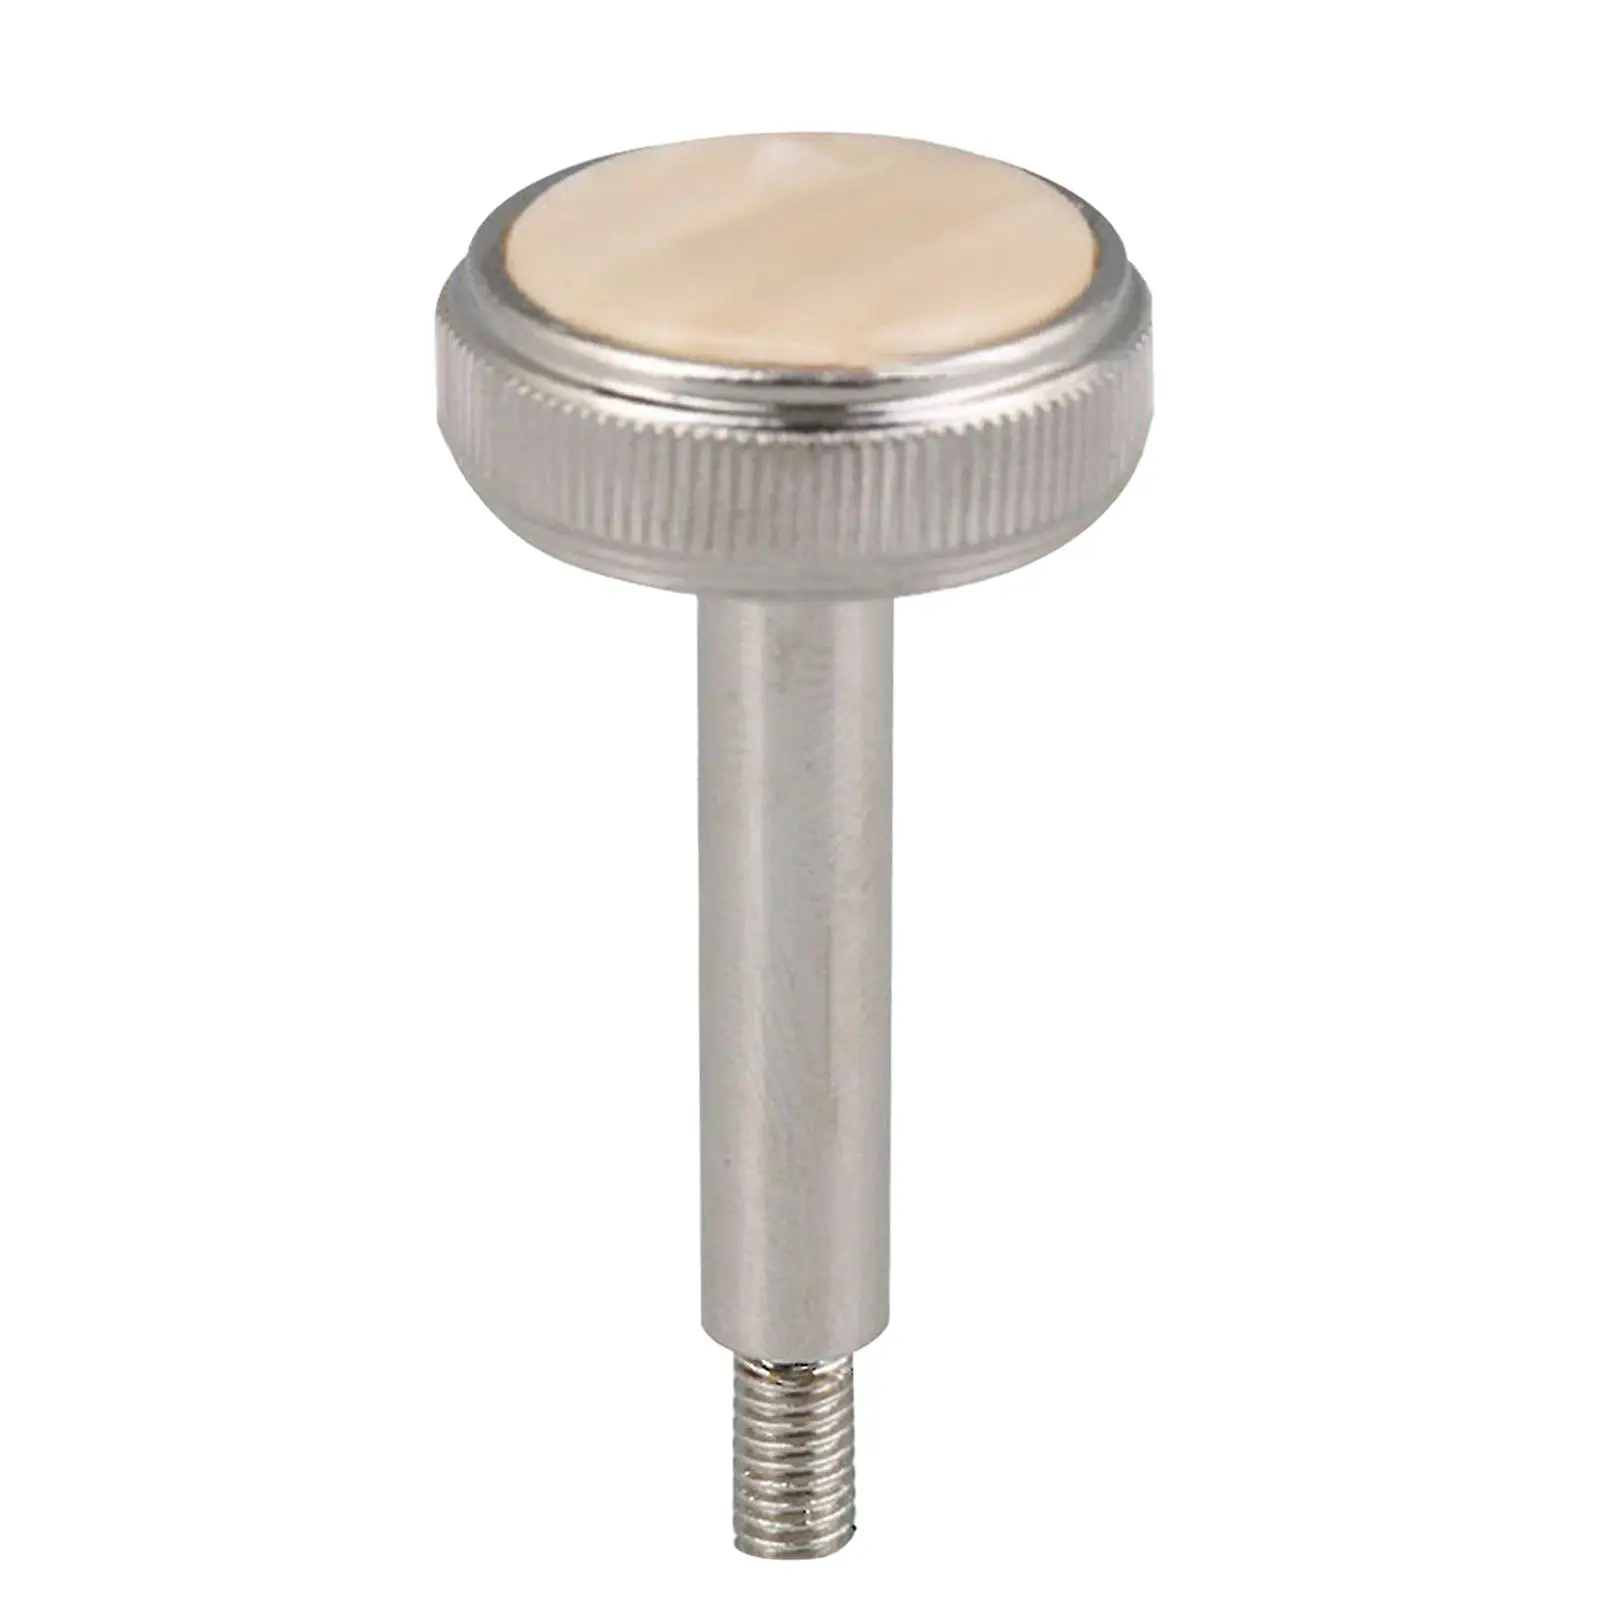 Baritone Trumpet Finger Buttons Replace Repair Tool for Maintainance Tuba